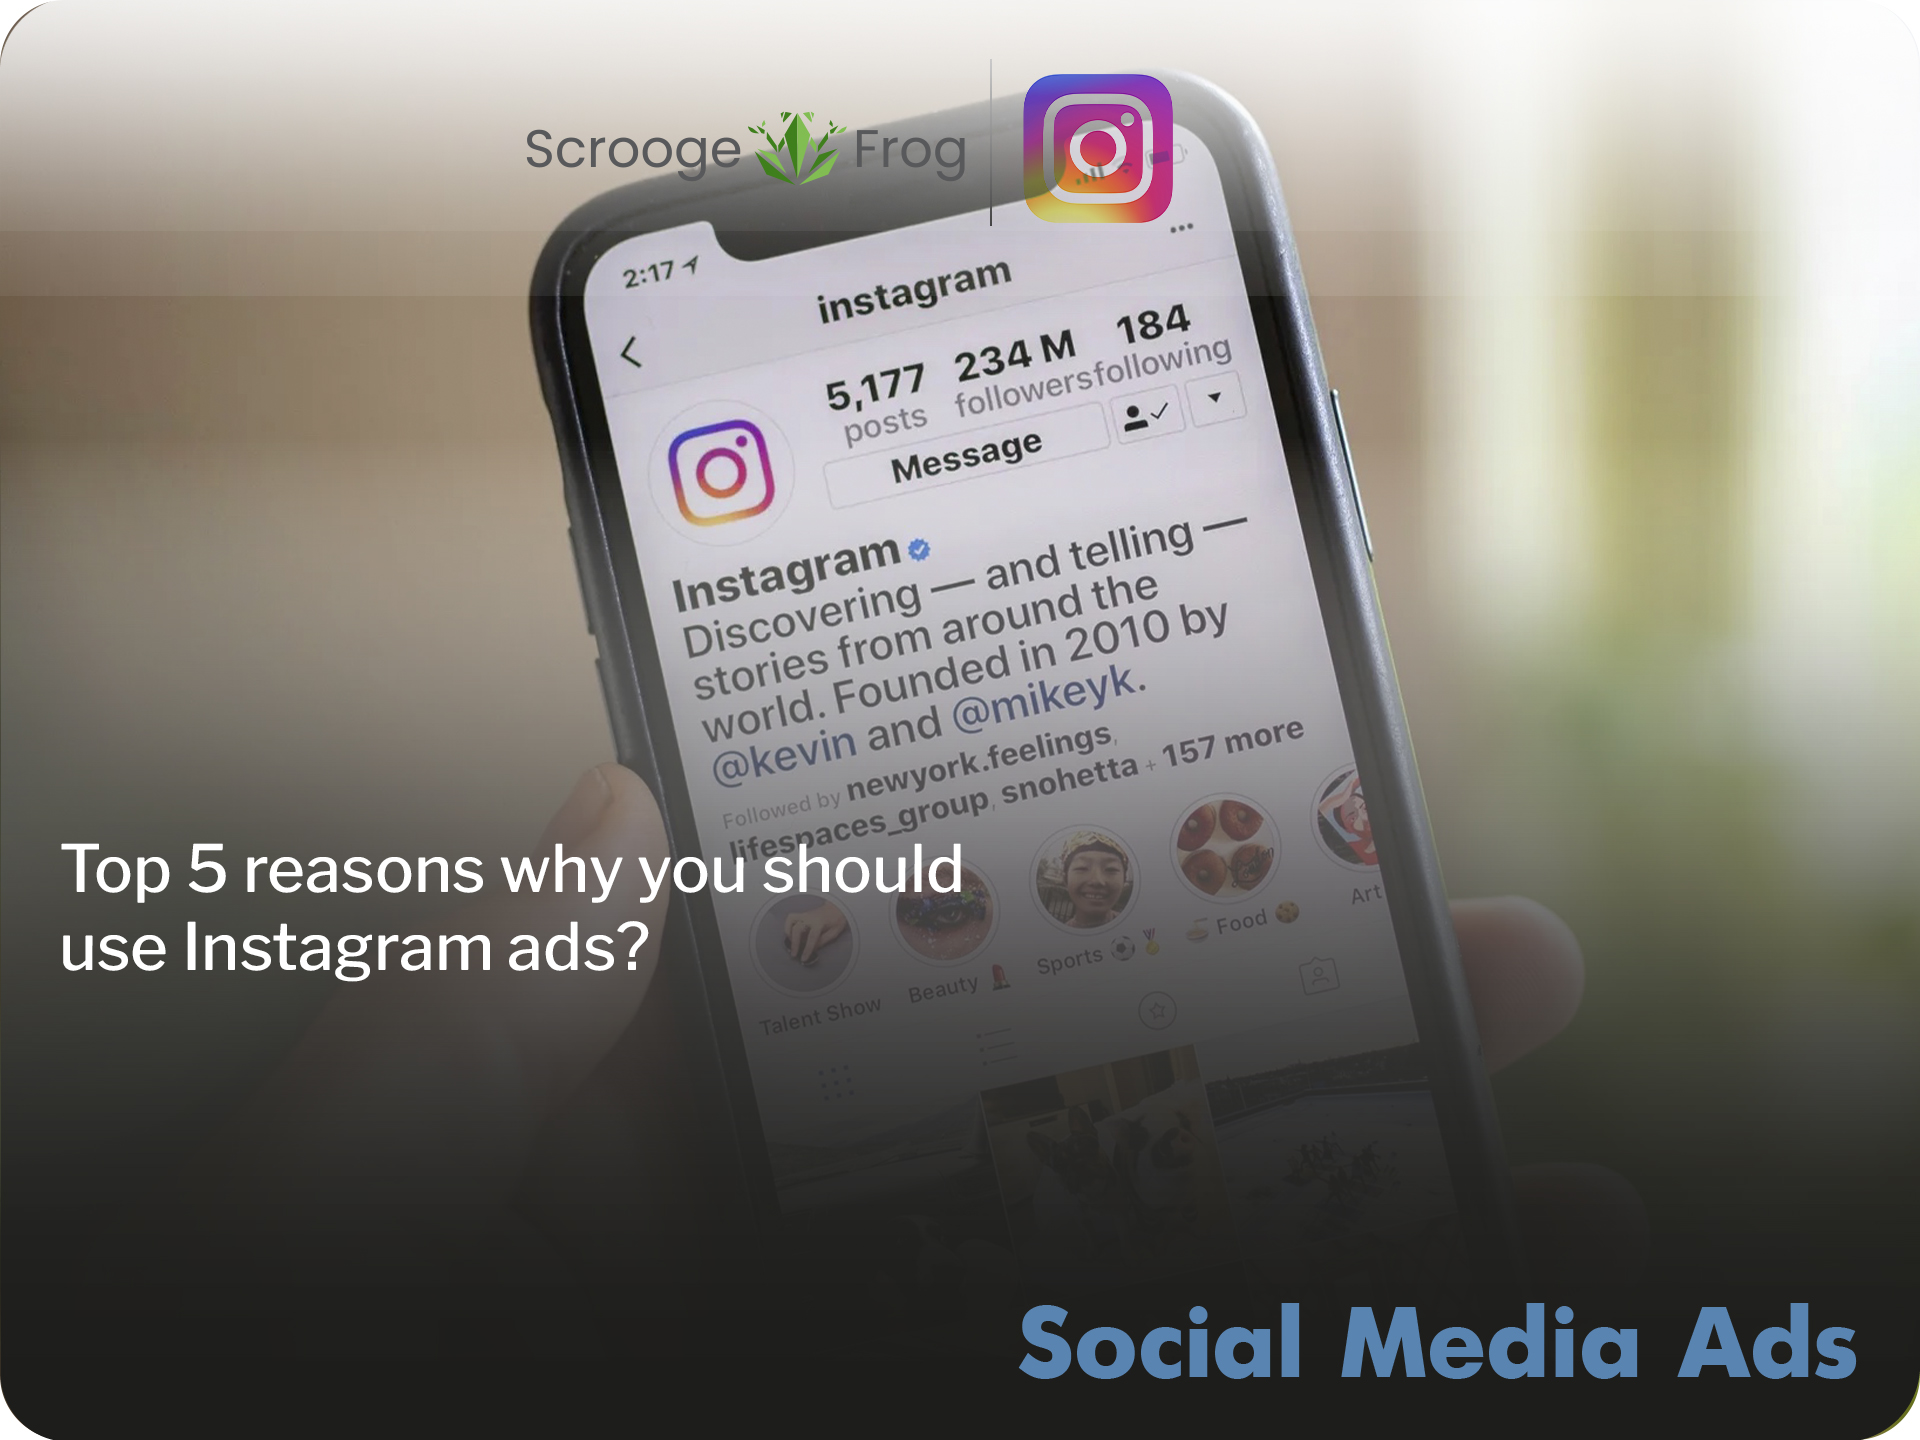 Top 5 reasons why you should use Instagram ads?